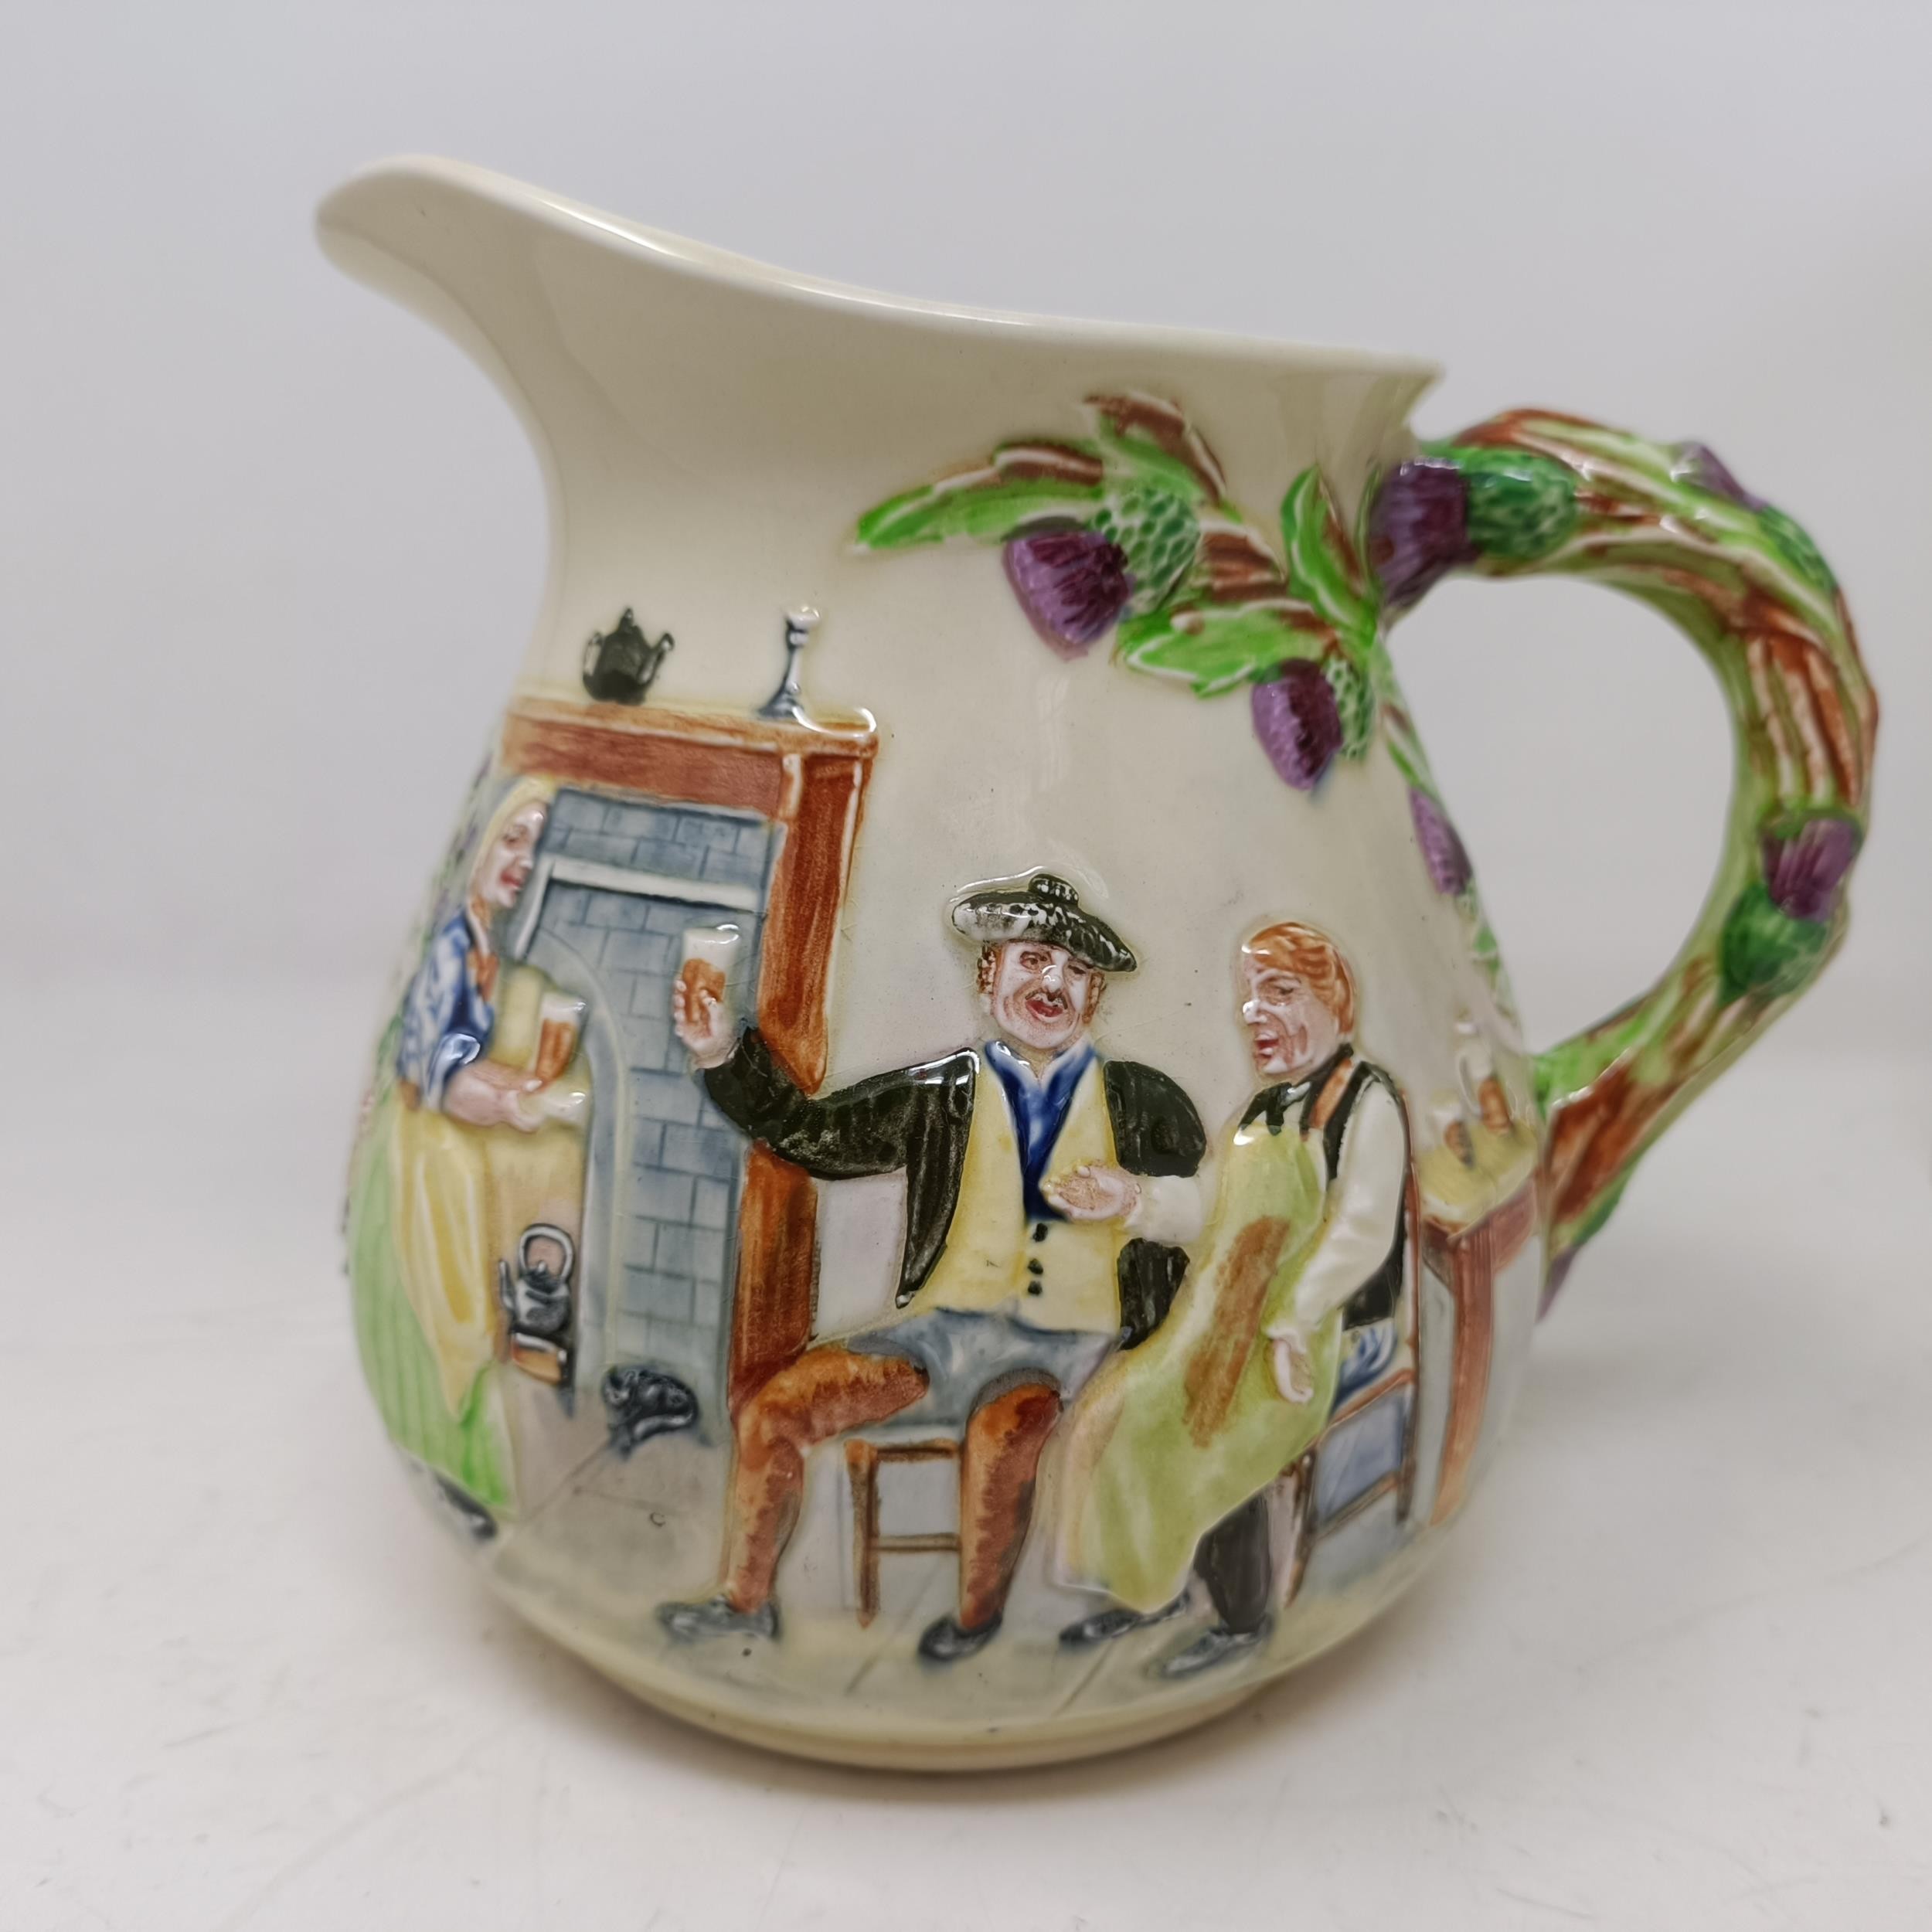 A Royal Doulton Dickens Ware musical jug, The Gaffers Story, 20 cm high, a coffee pot, decorated - Image 20 of 28